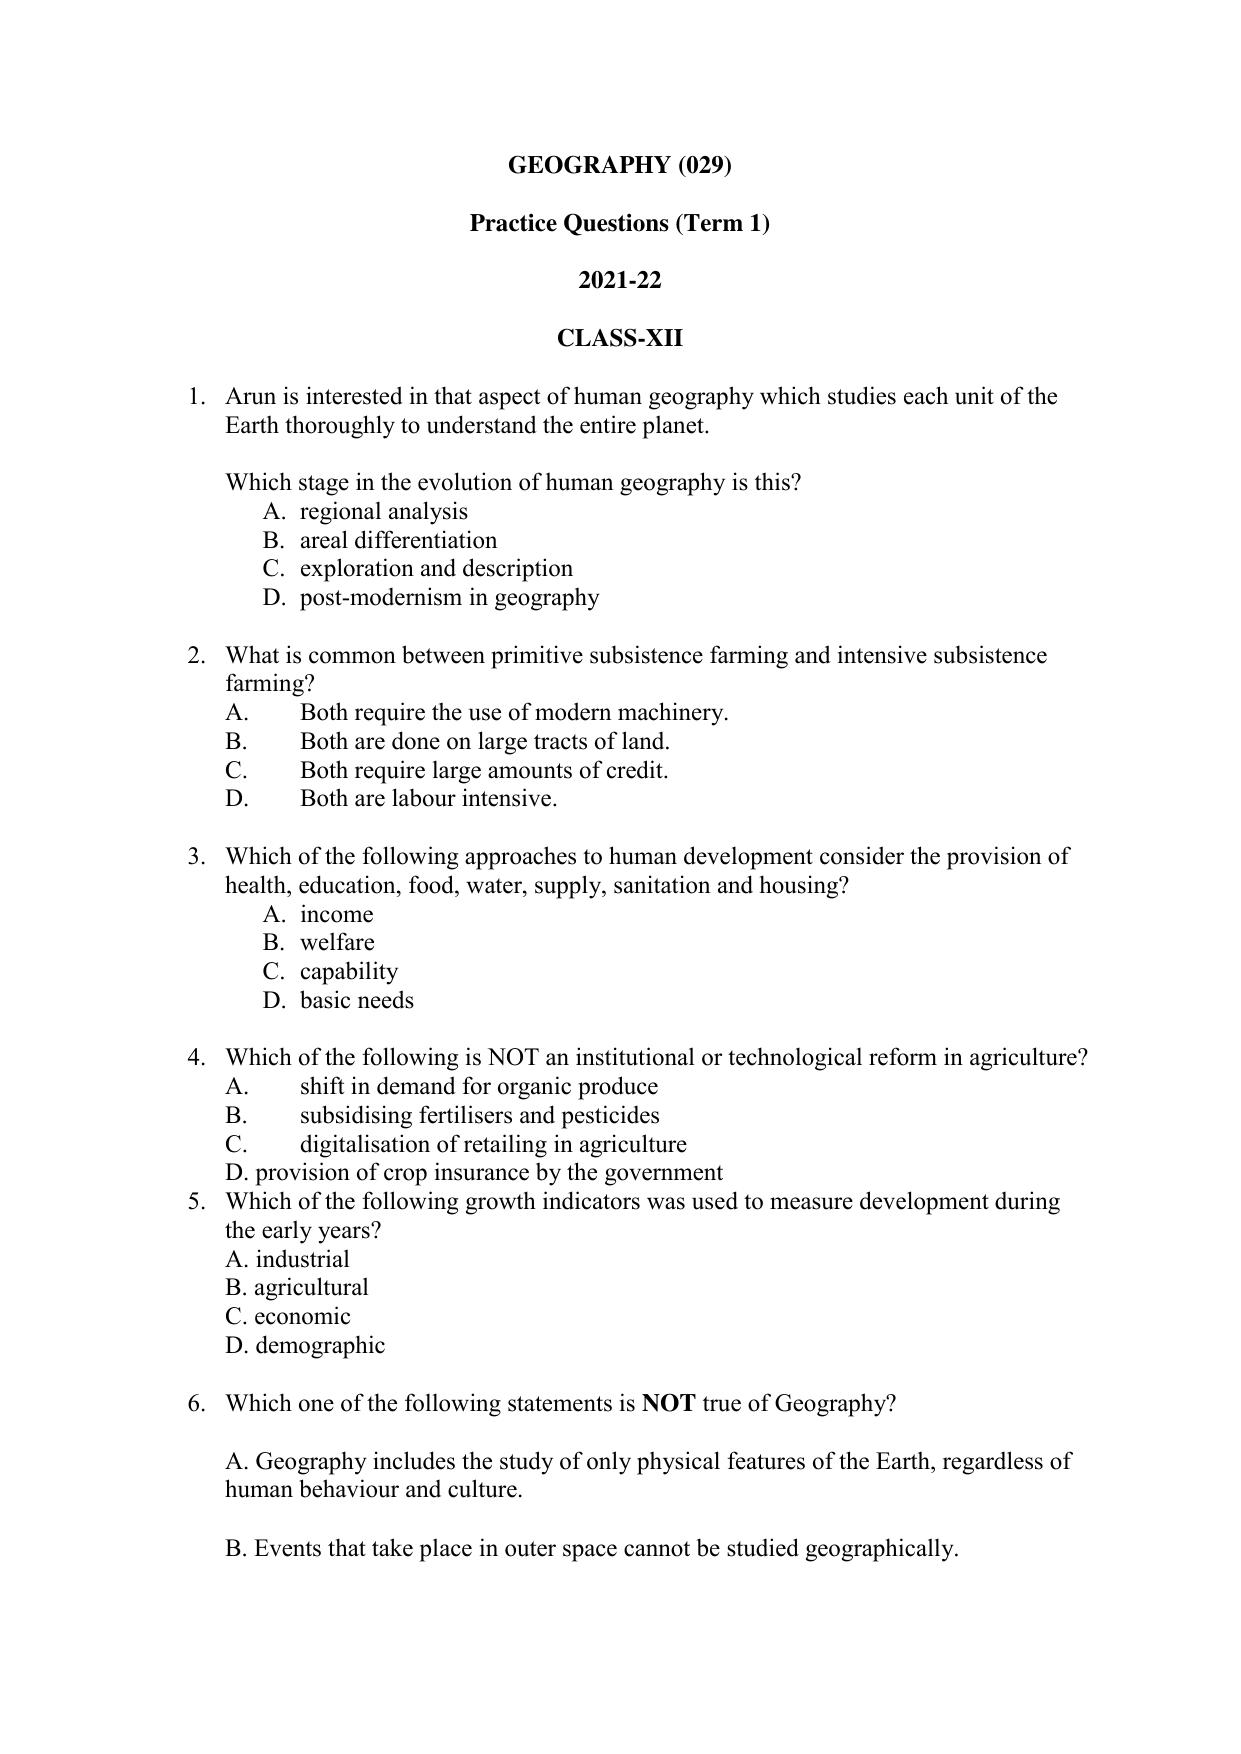 CBSE Class 12 Geography Term 1 Practice Questions 2021-22 - Page 1